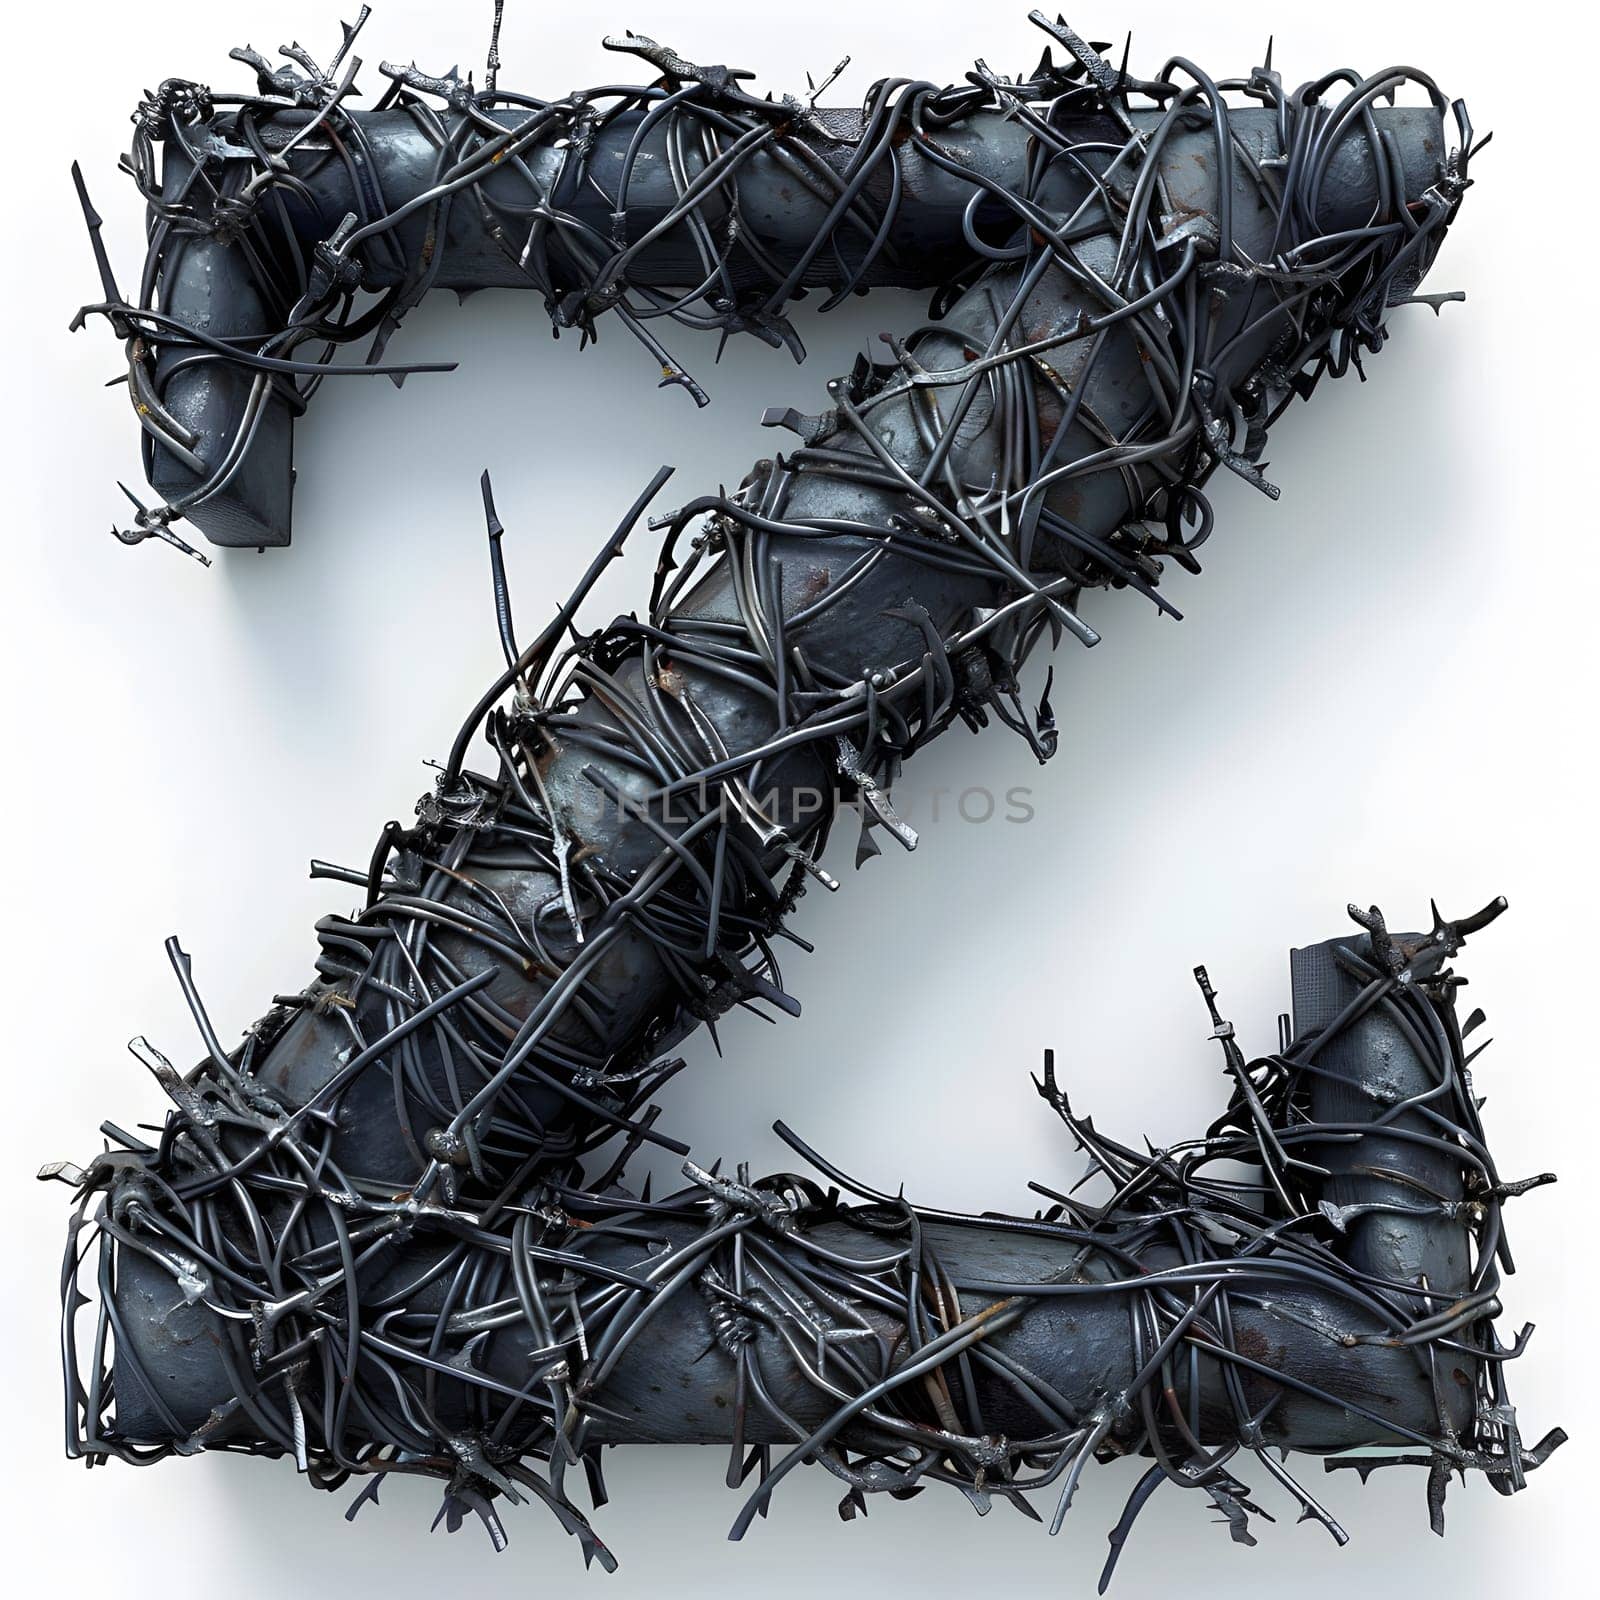 The letter z is crafted from twigs in the shape of barbed wire, set against a white background. This unique pattern combines terrestrial plant elements with a fashion accessory twist